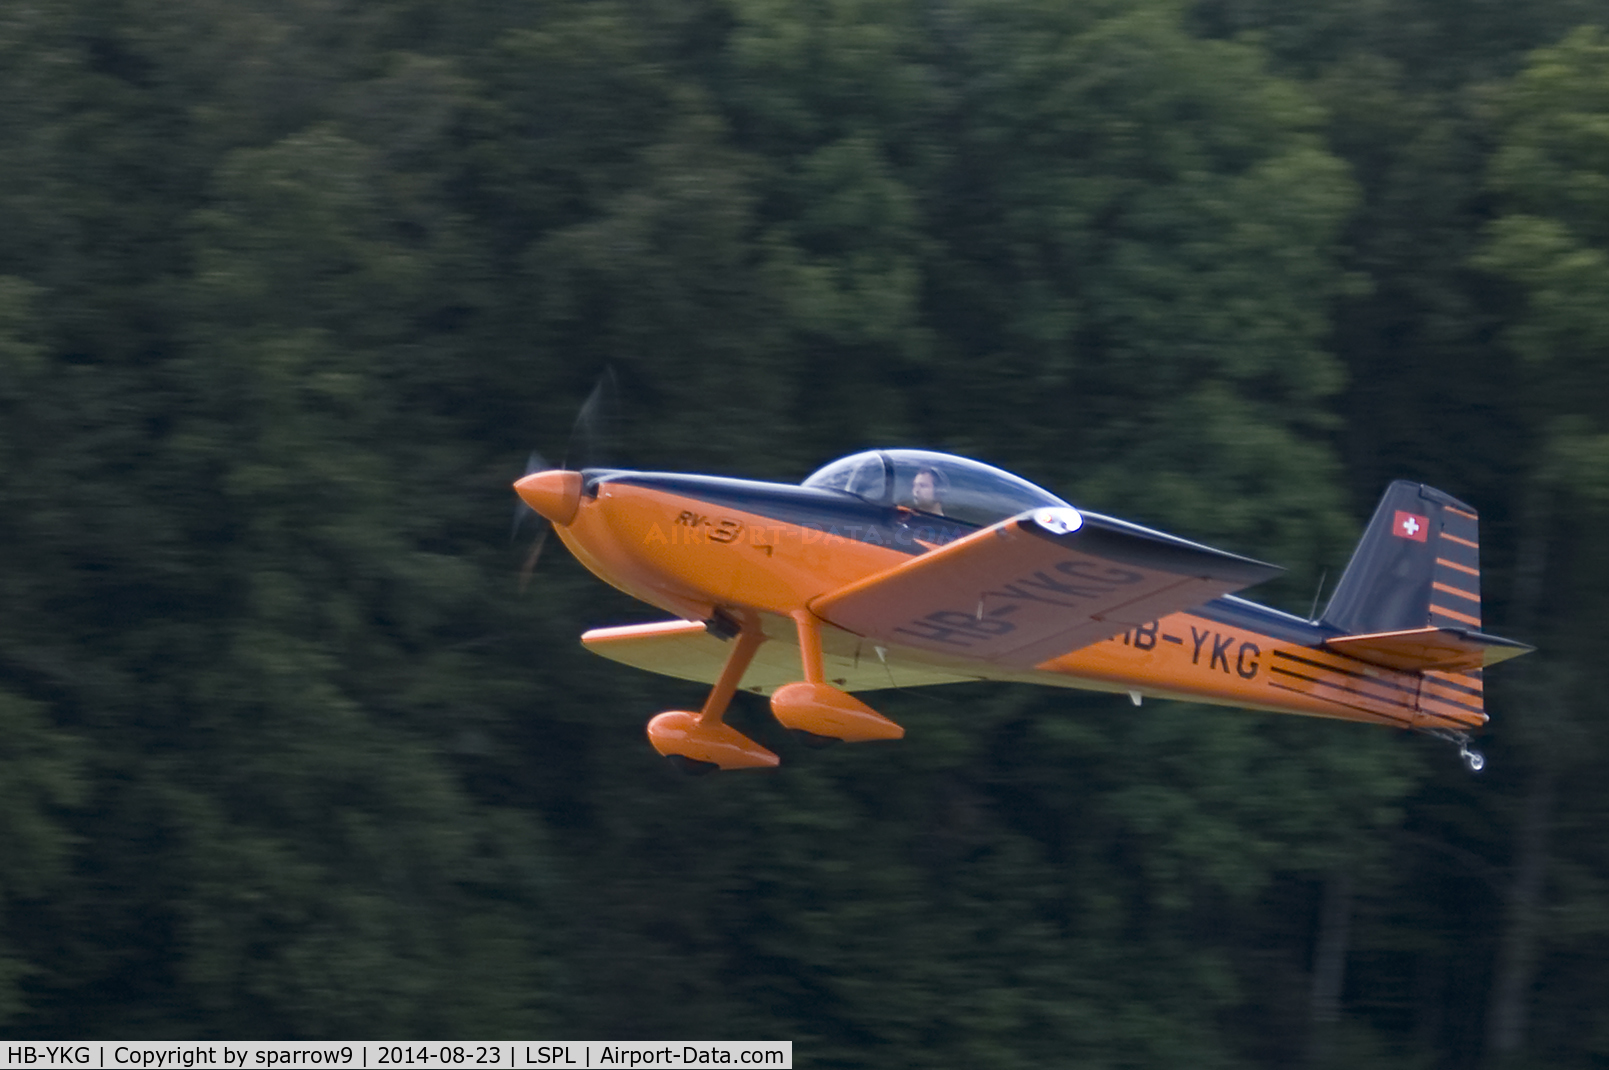 HB-YKG, 2014 Vans RV-8 C/N 82376, On climb-out from Langenthal-Bleienbach airfield.